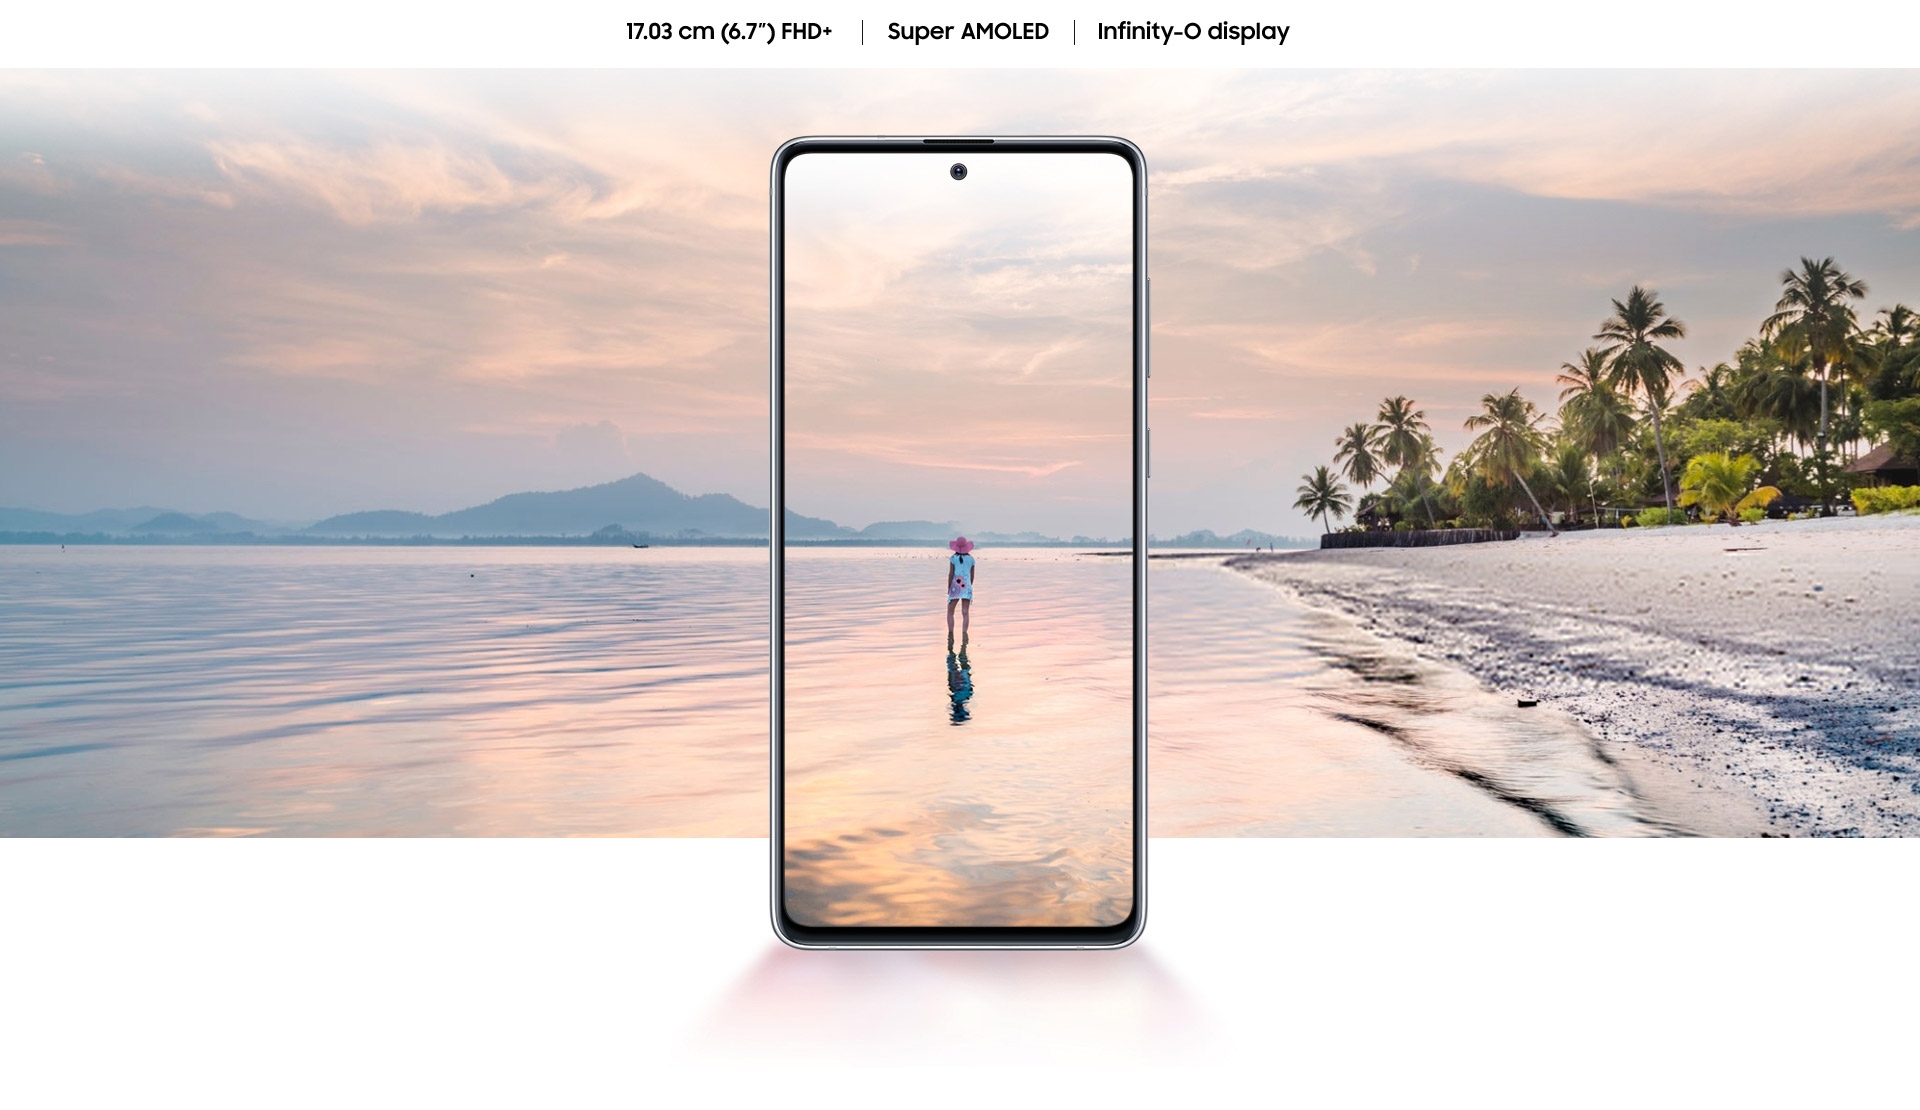 Samsung Galaxy Note 10 Lite Review 2